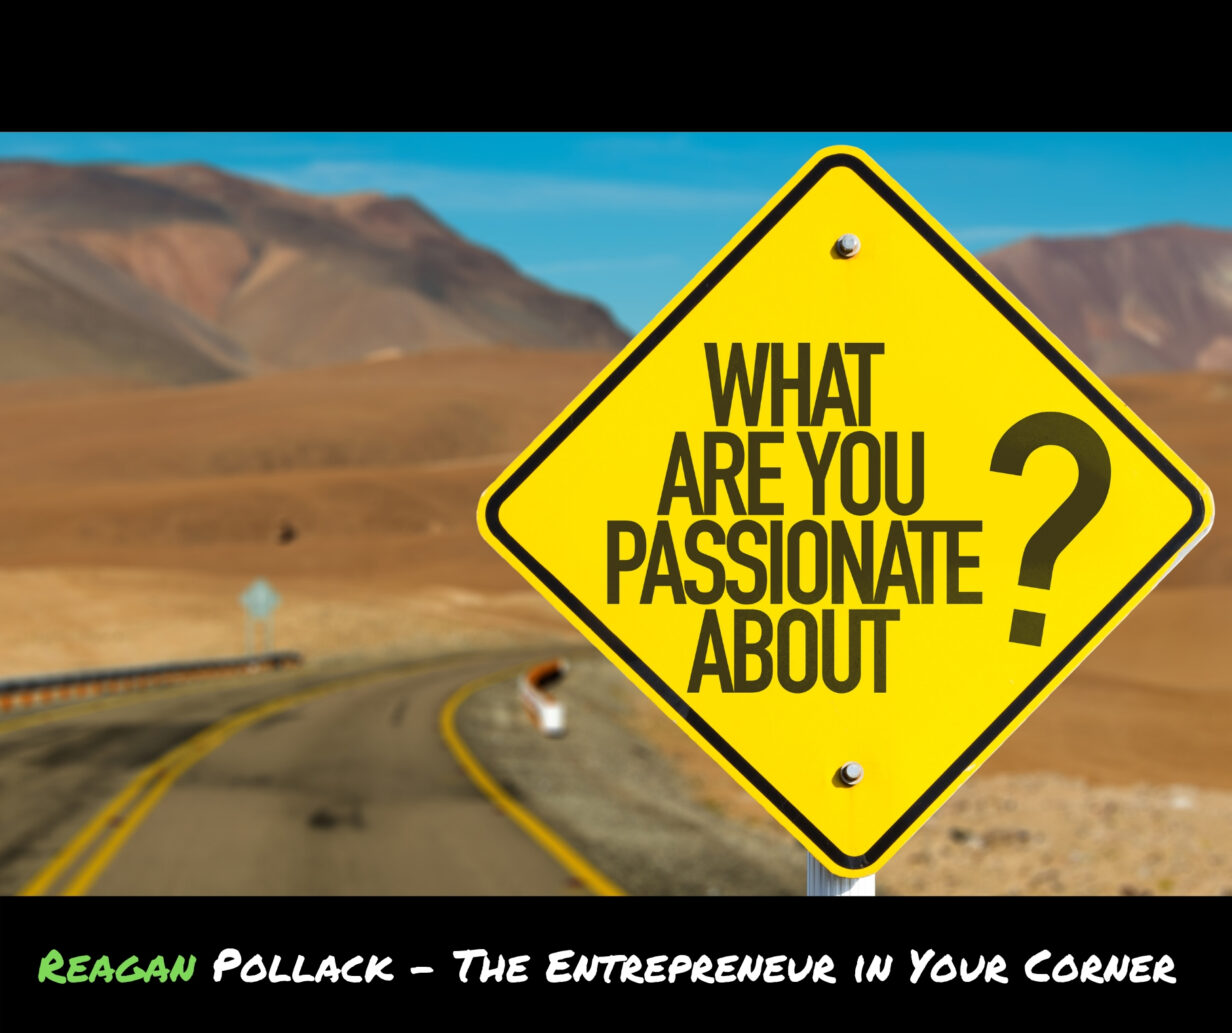 How to Find Your Passion - Reagan Pollack